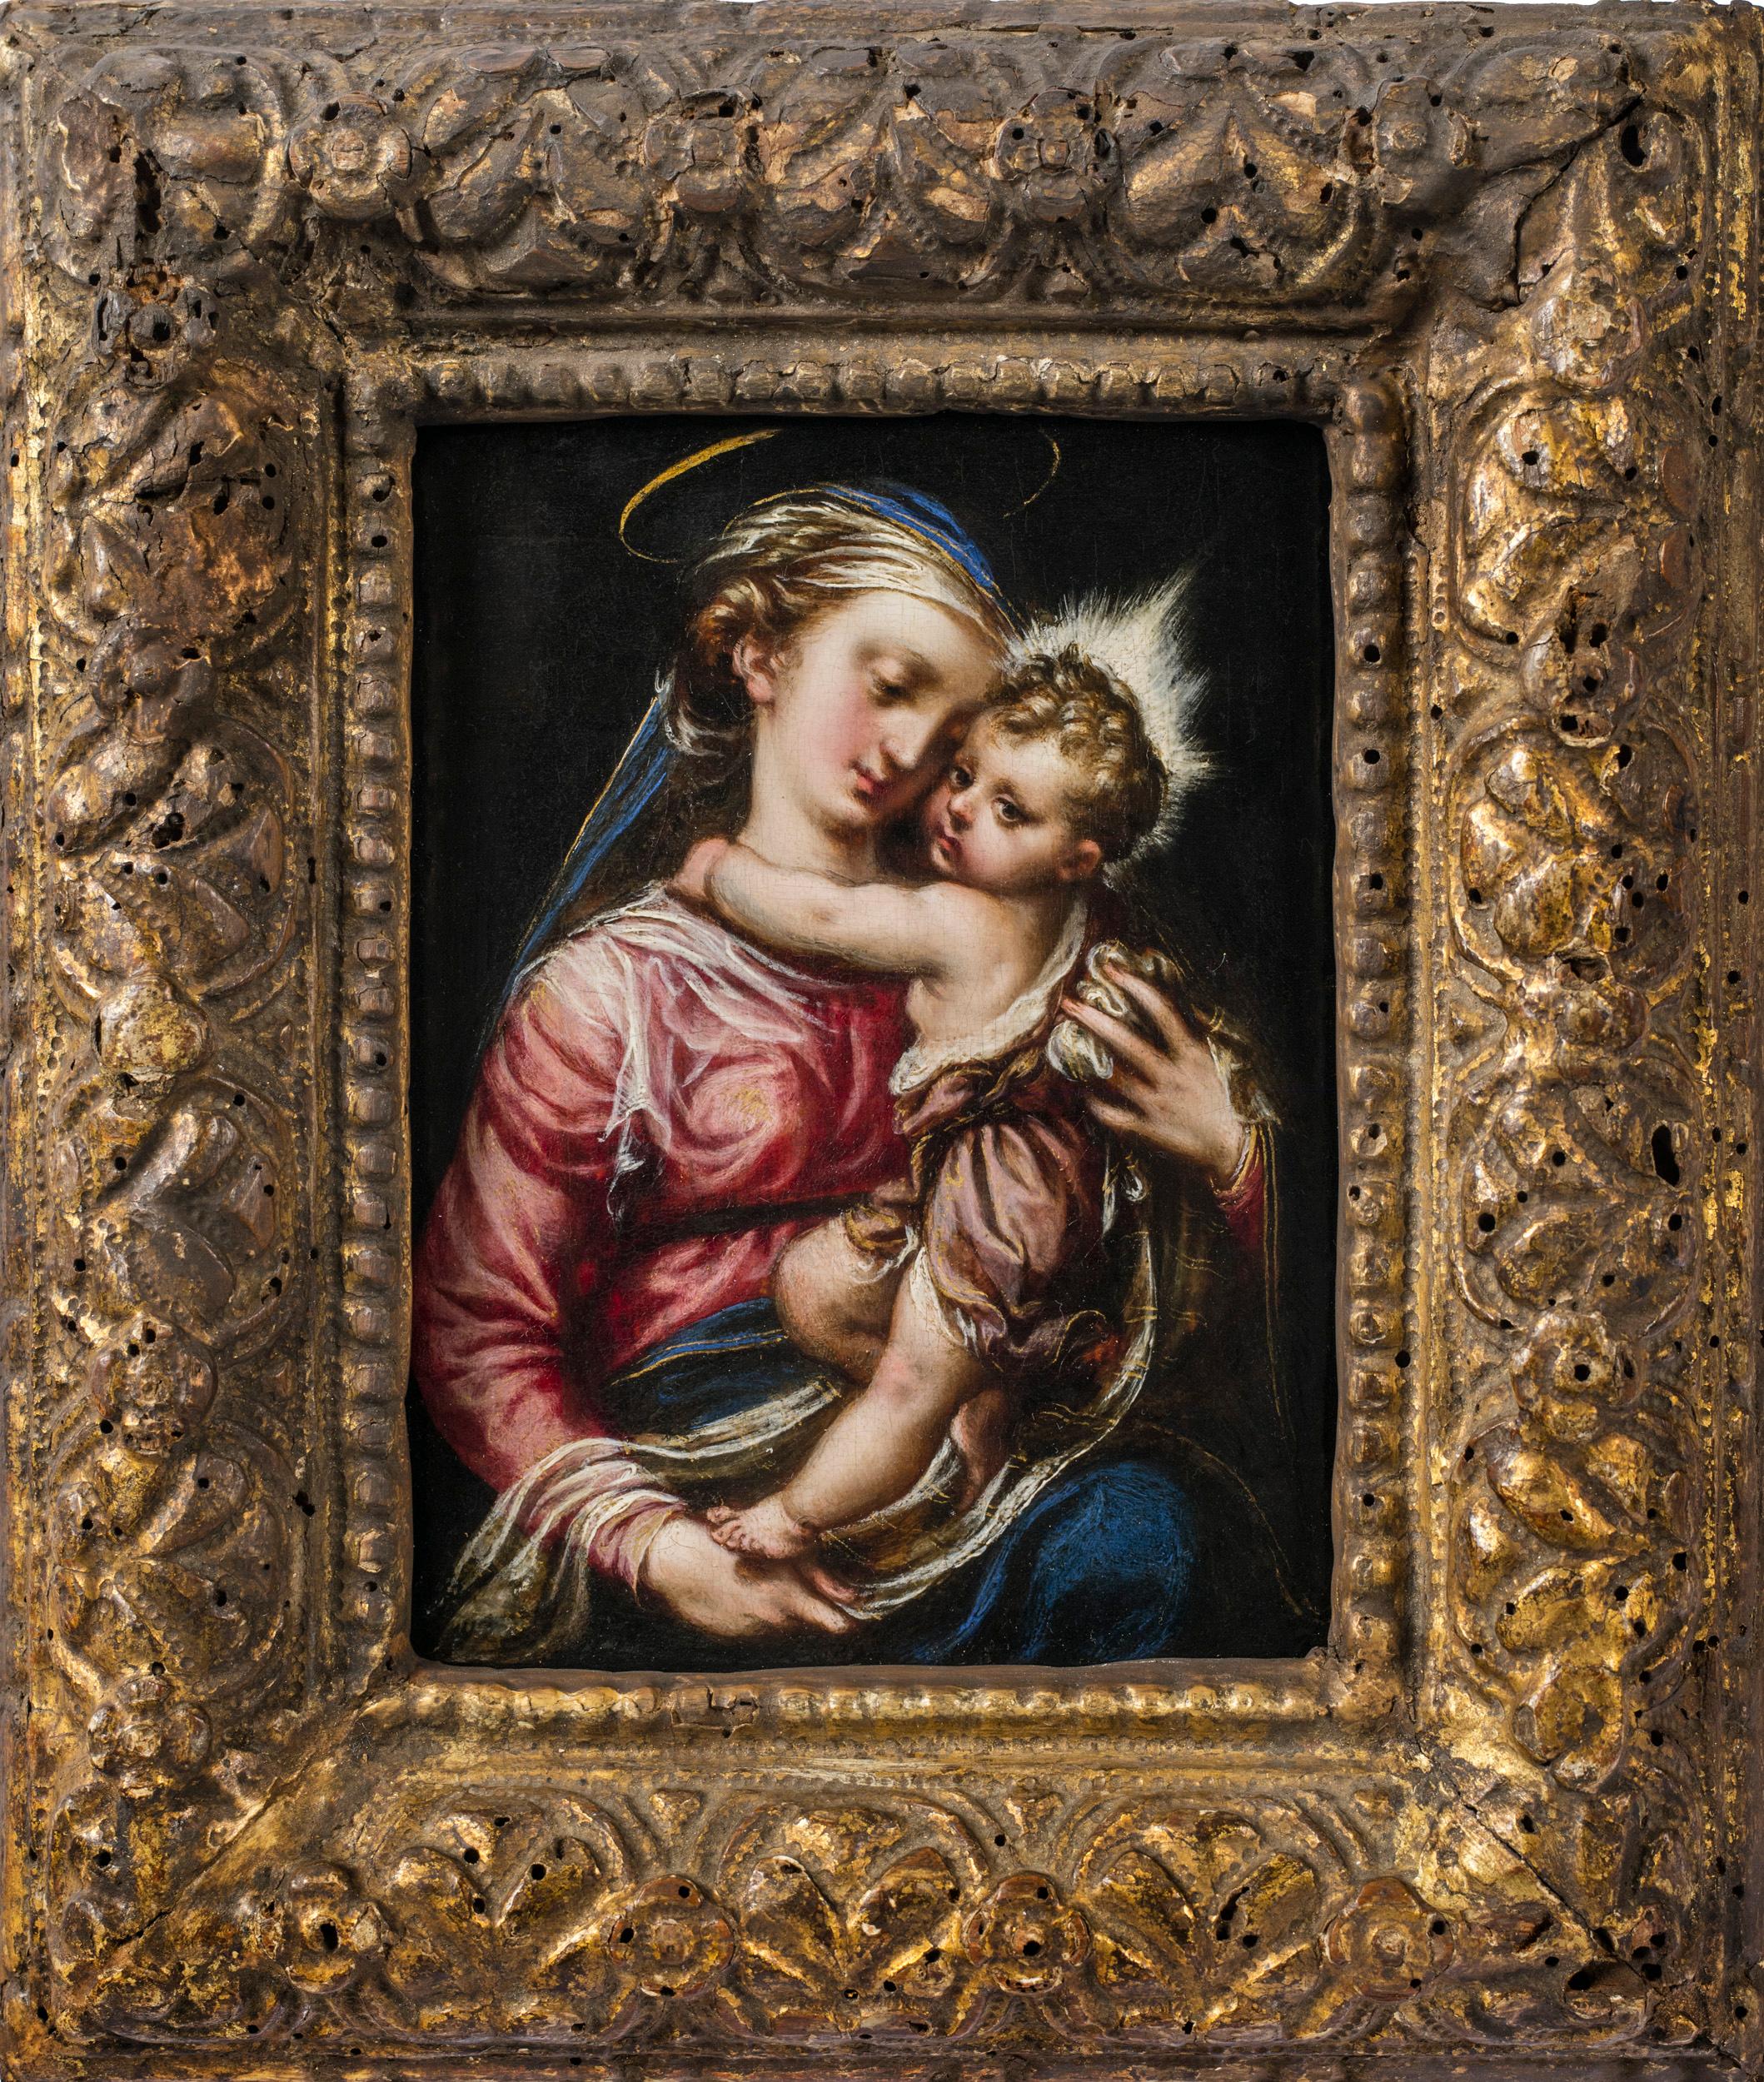 Madonna and Child - Painting by Alonso Sánchez Coello